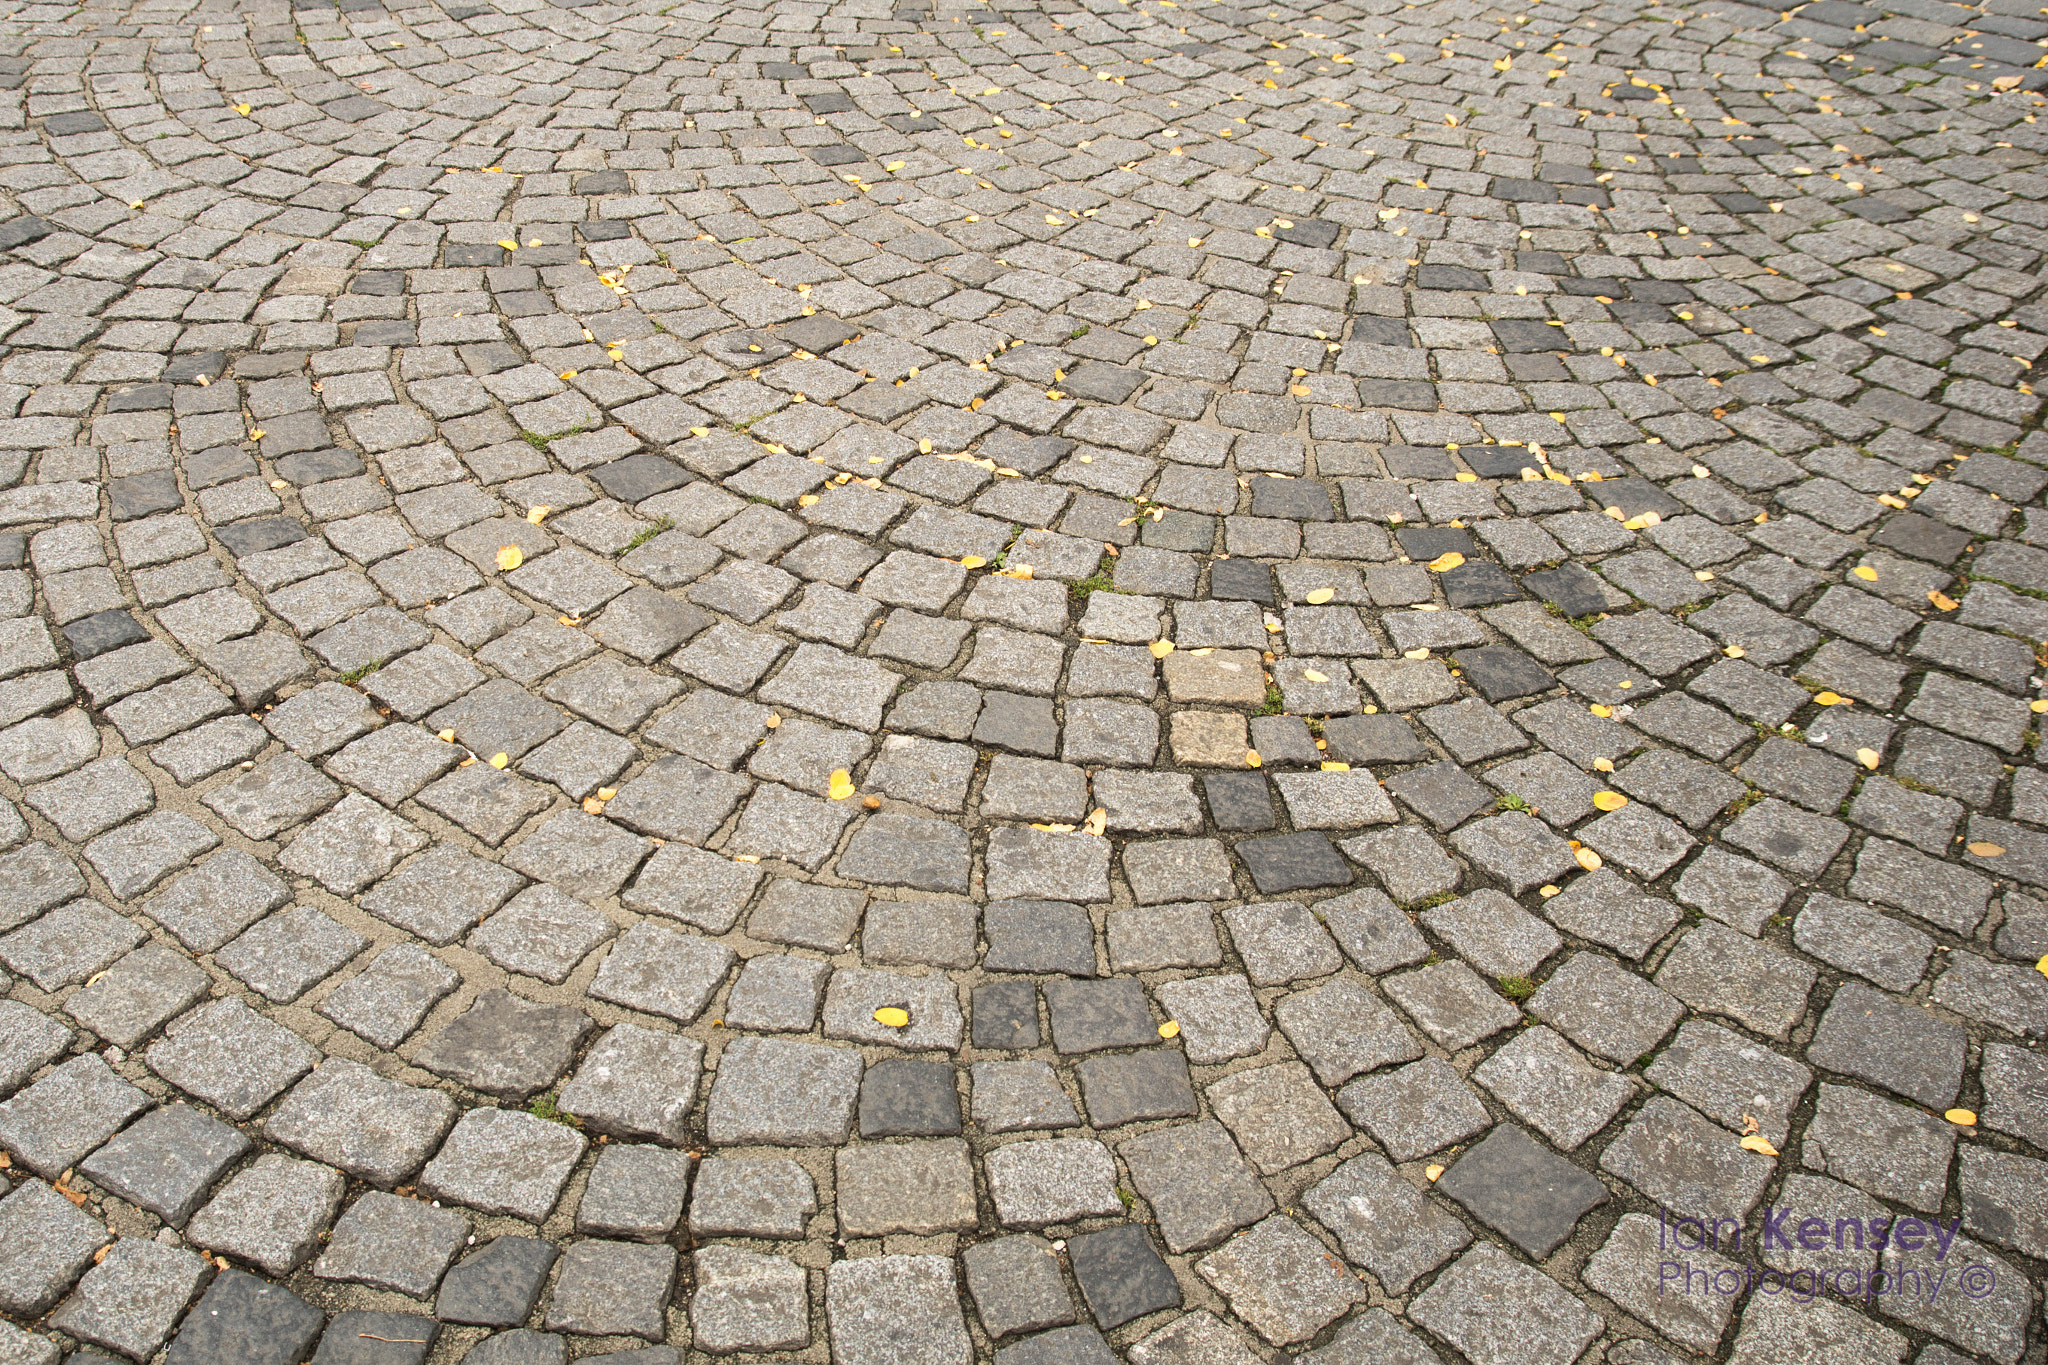 Sony ILCA-77M2 + Tamron SP AF 17-50mm F2.8 XR Di II LD Aspherical (IF) sample photo. The radiant cobblestones photography